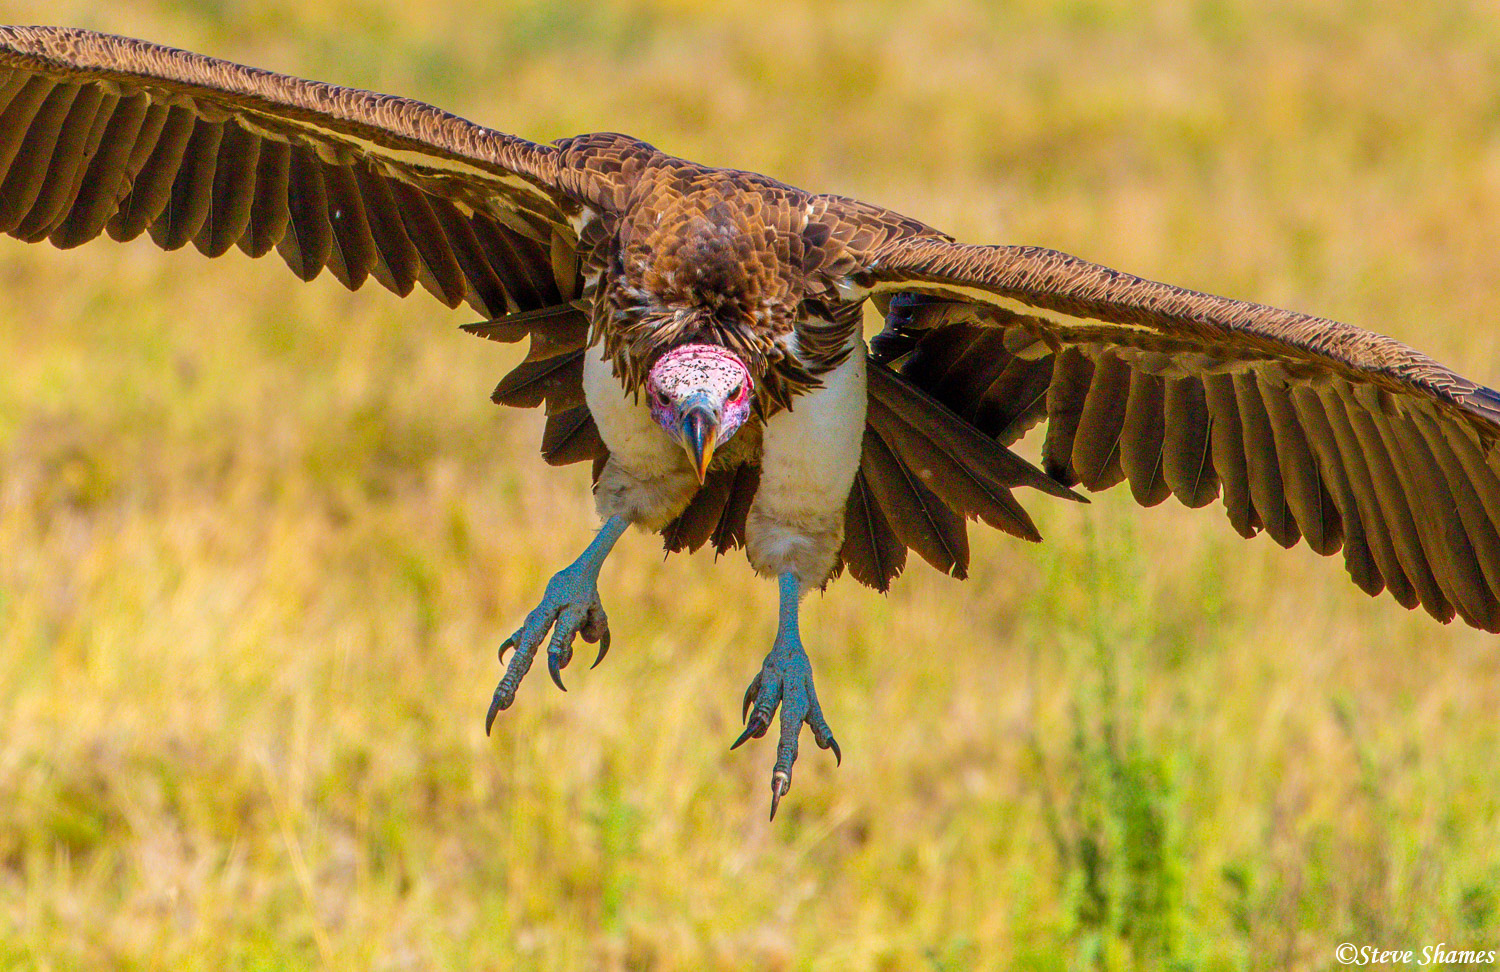 Vulture with landing gear ready, coming in to land.